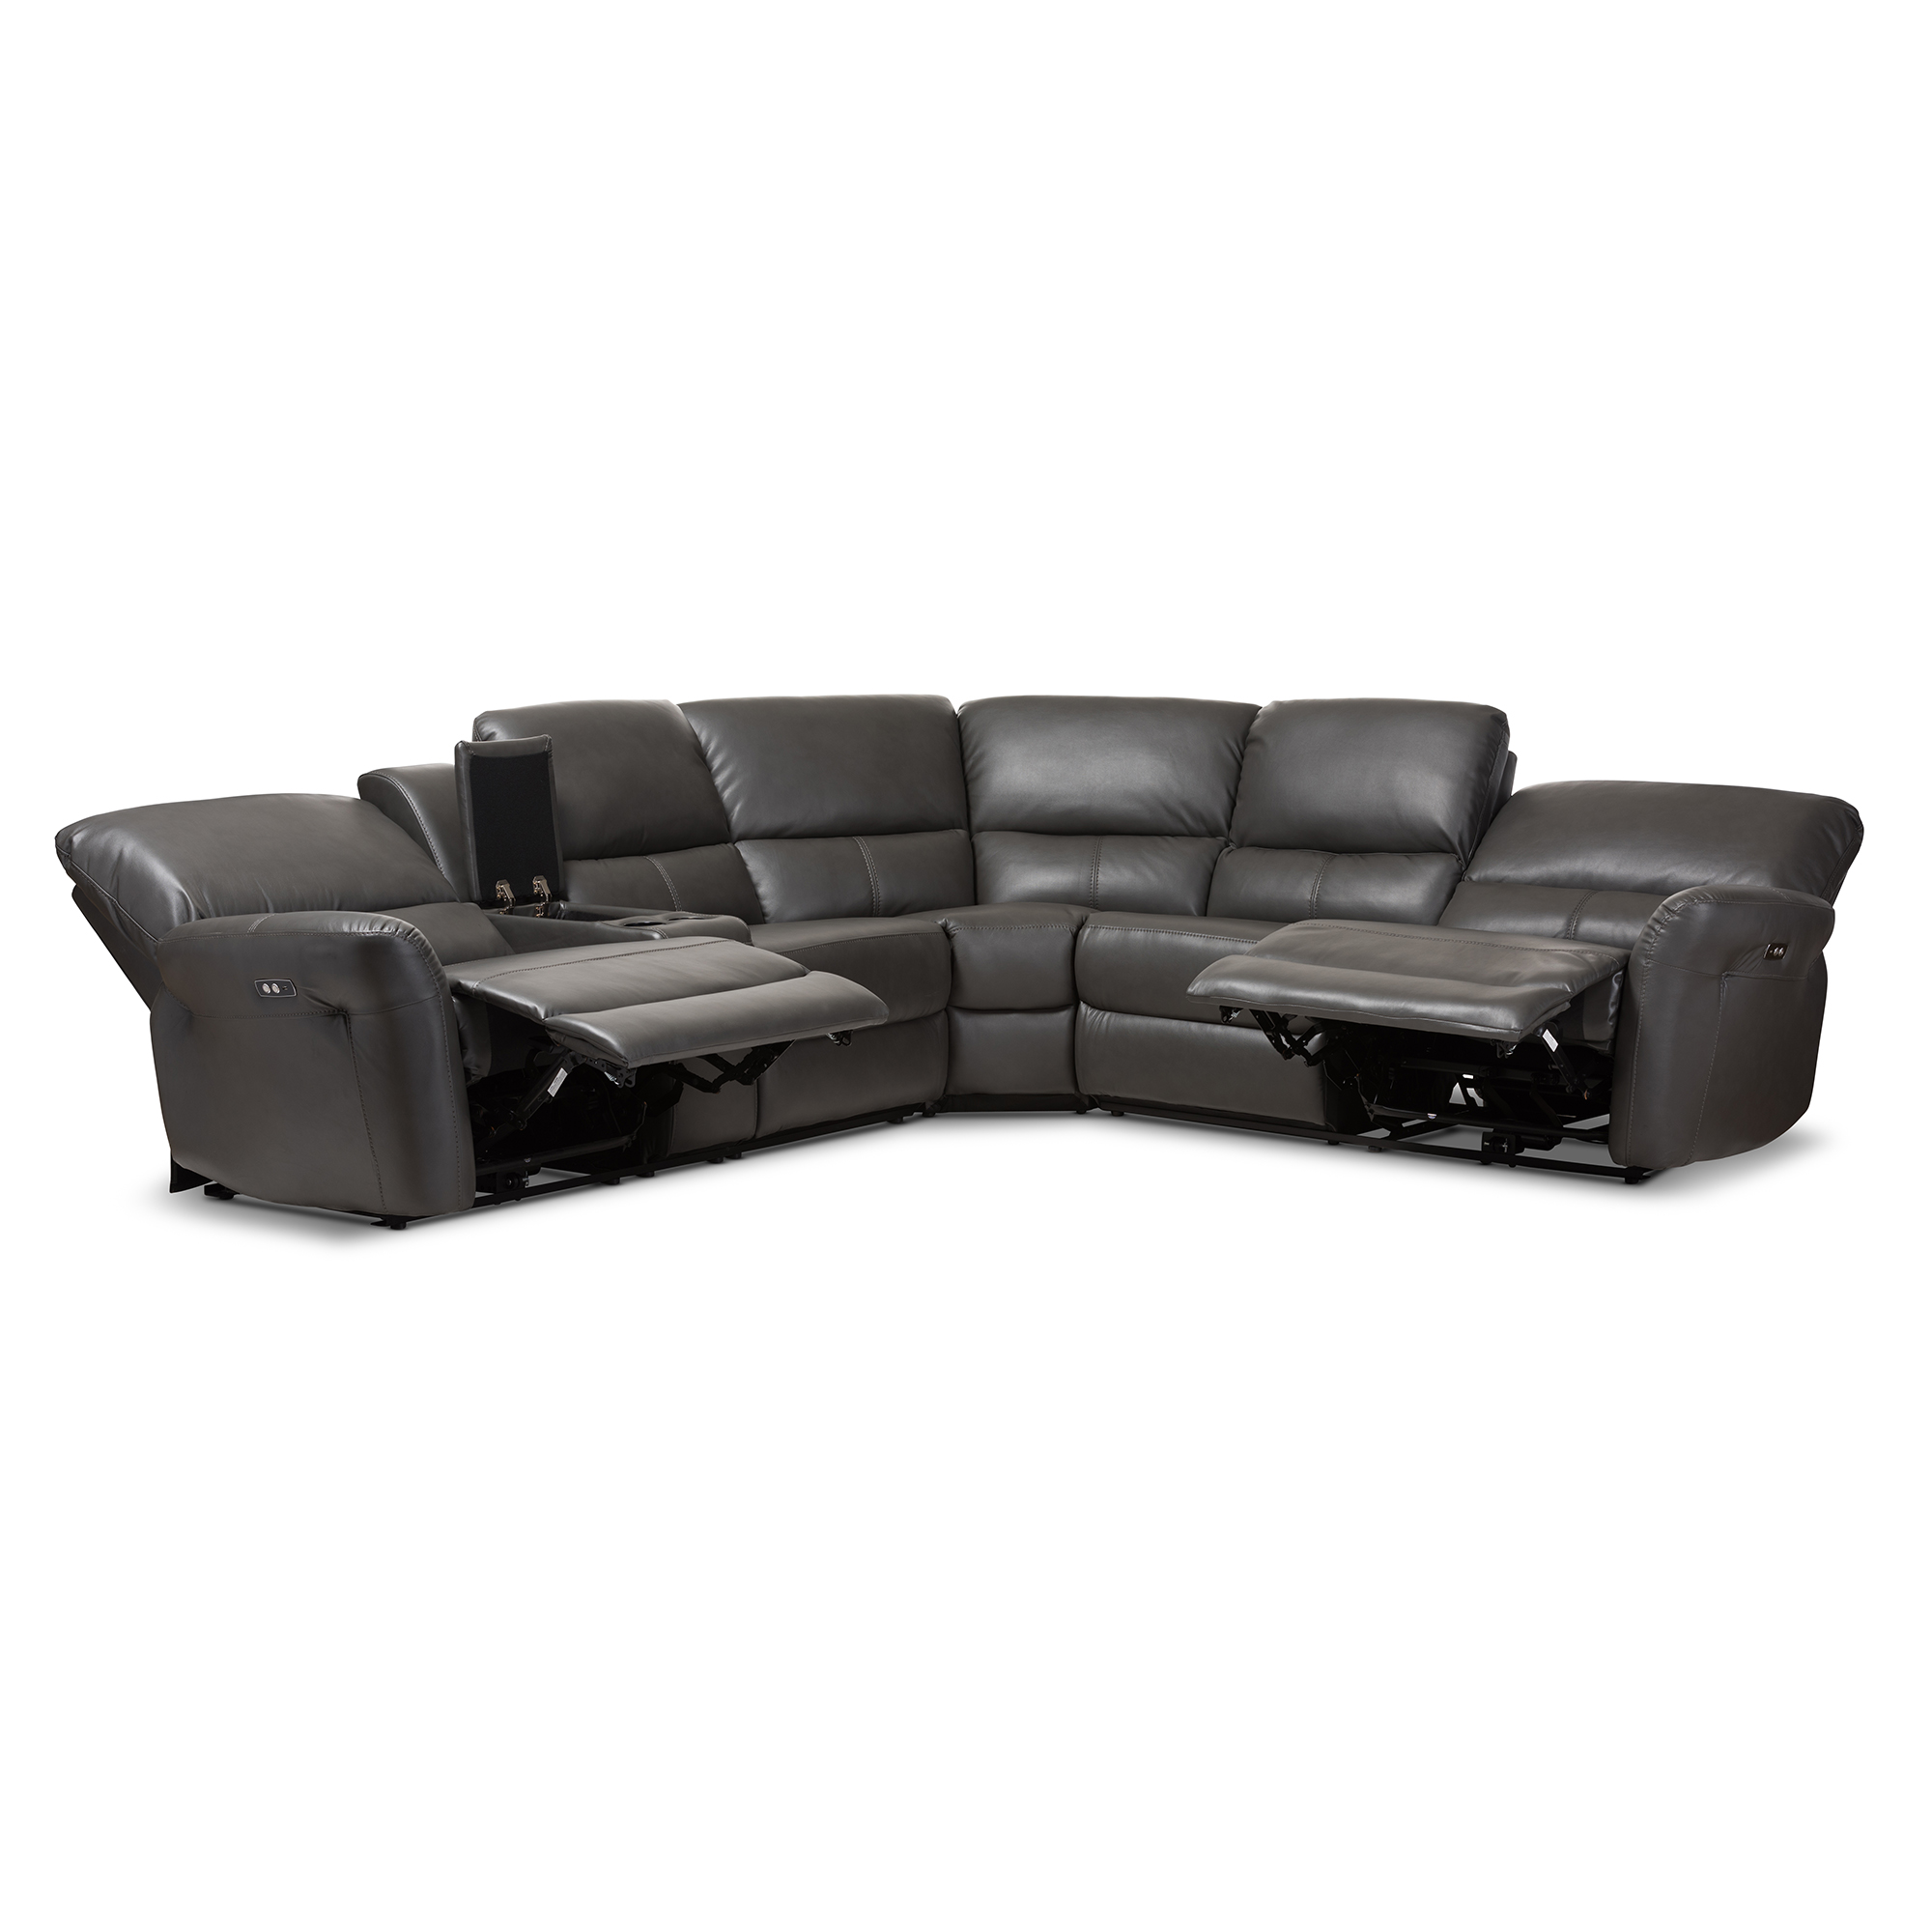 Amaris Modern Bonded Leather 5pc Power Reclining Sectional